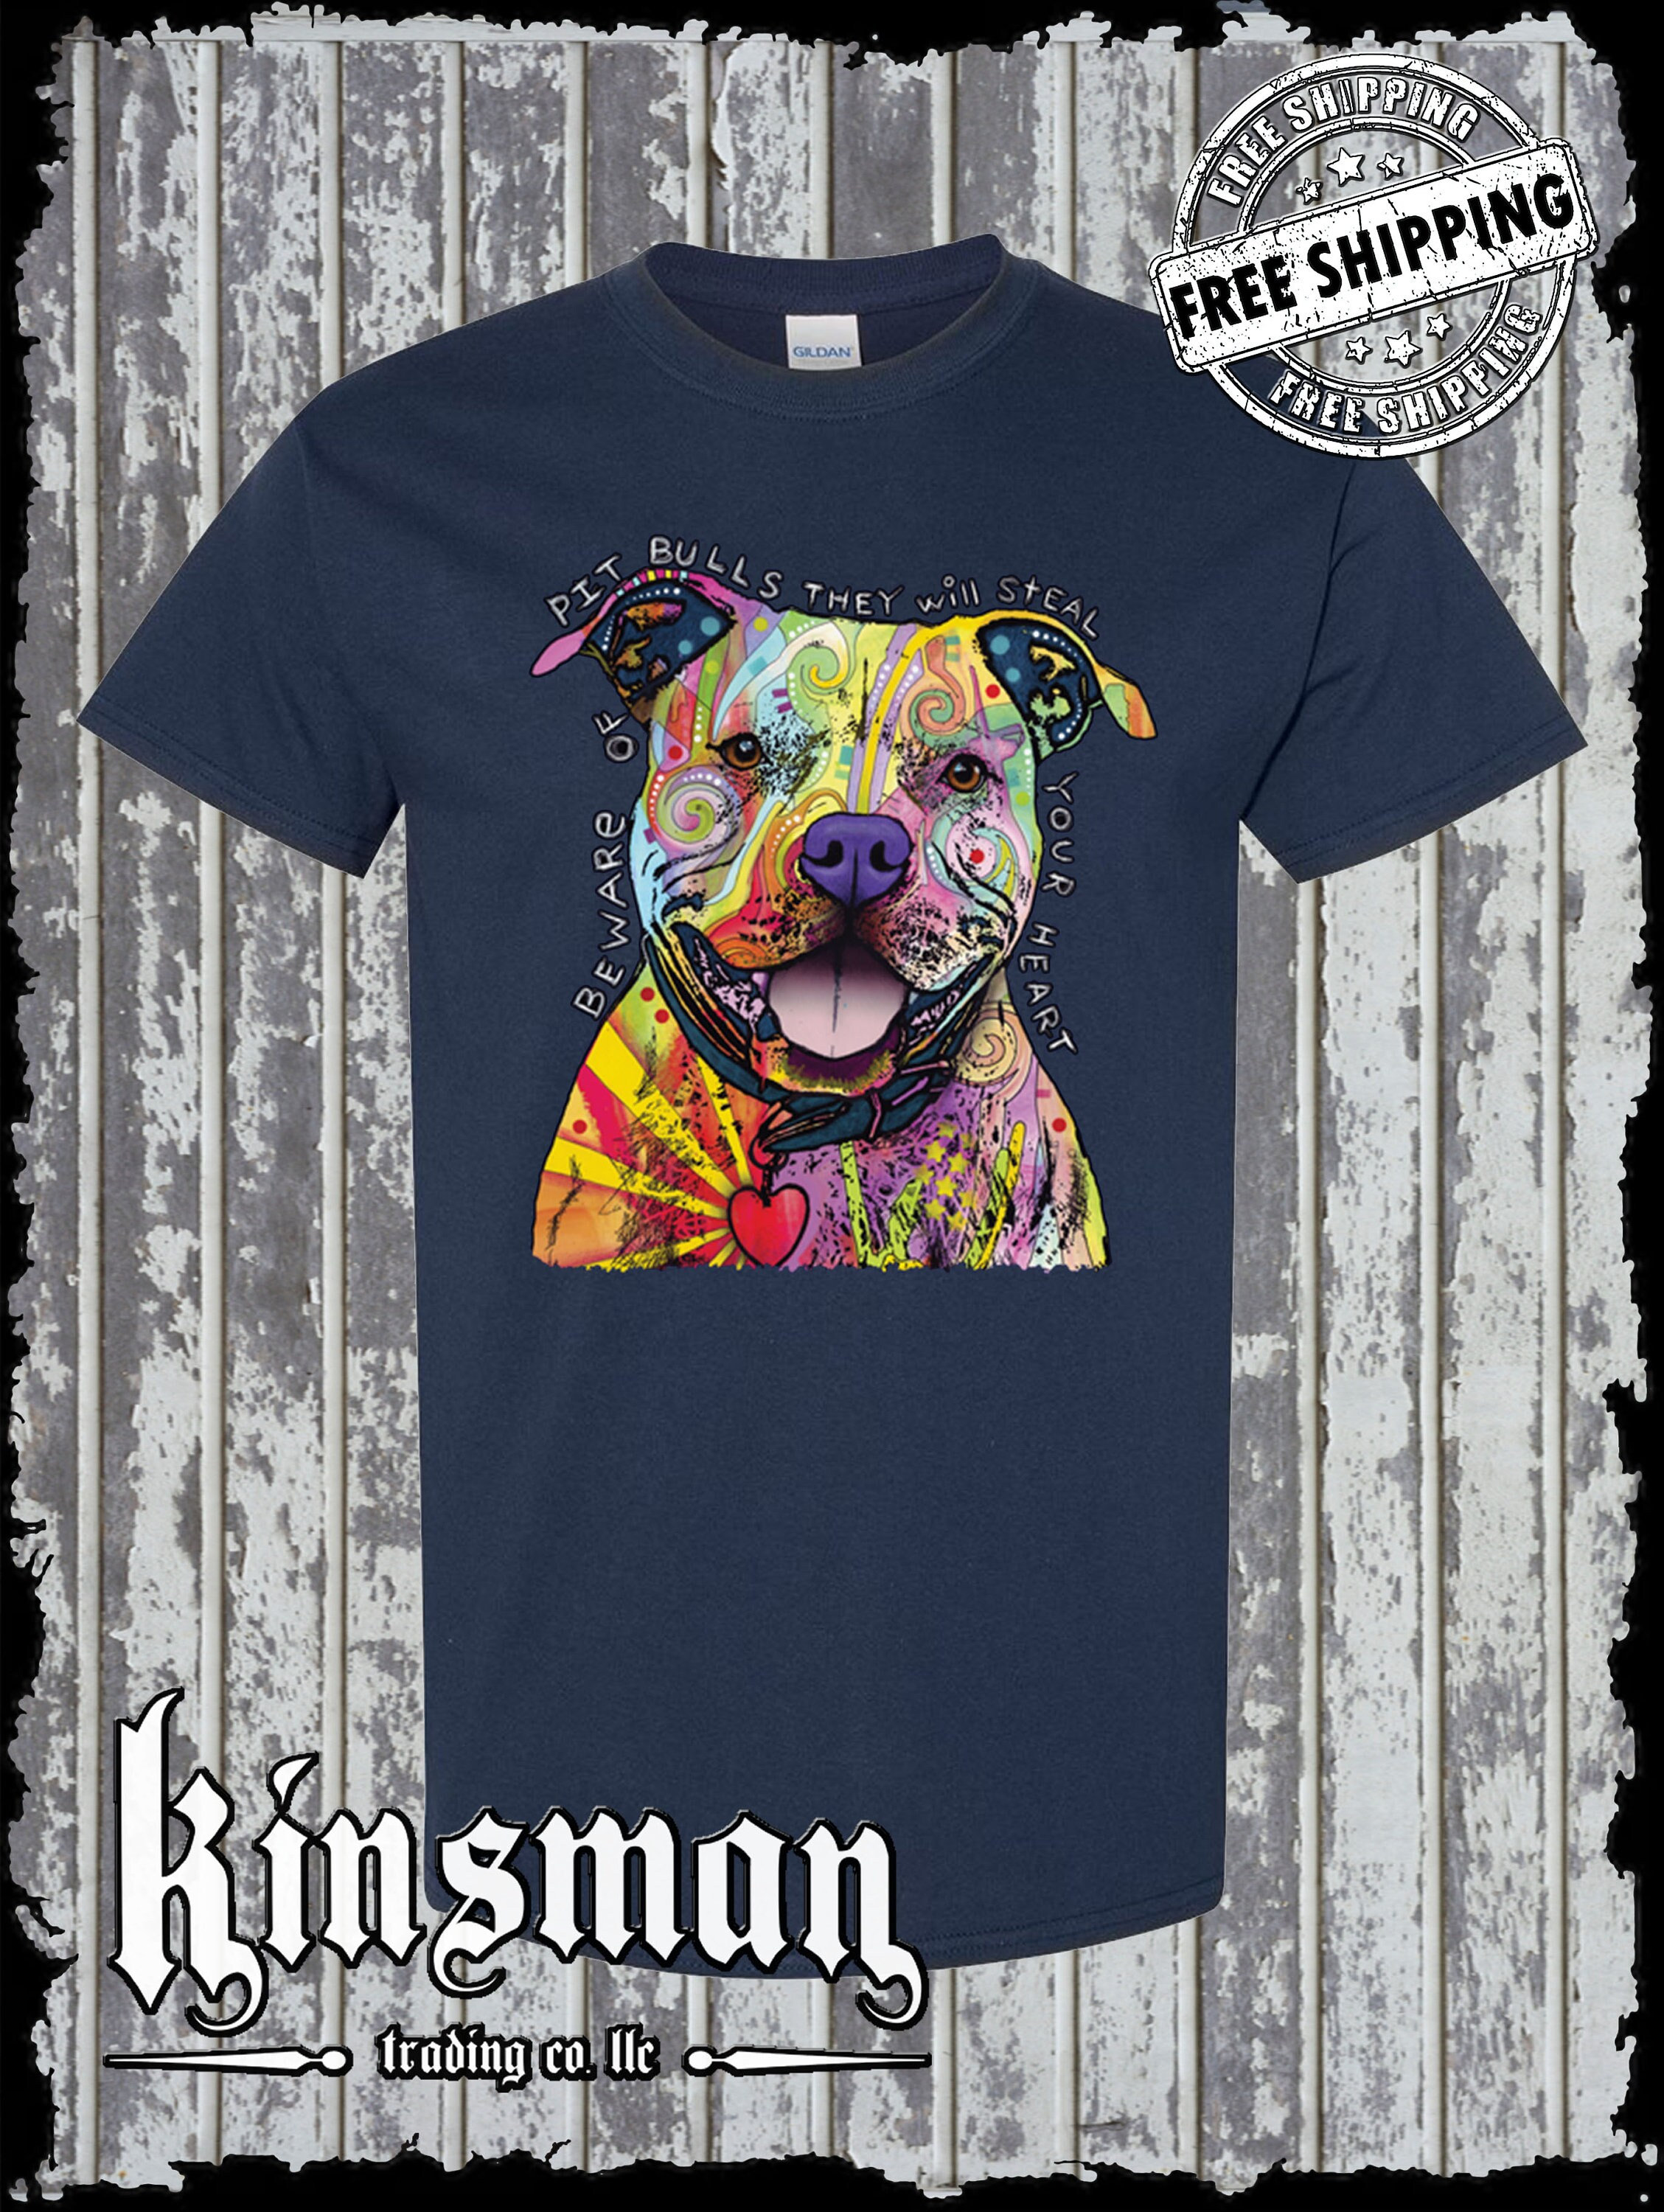 The Biggest Muscle In The Pit Bull Is Their Heart T-Shirt - Pitbull - Pin